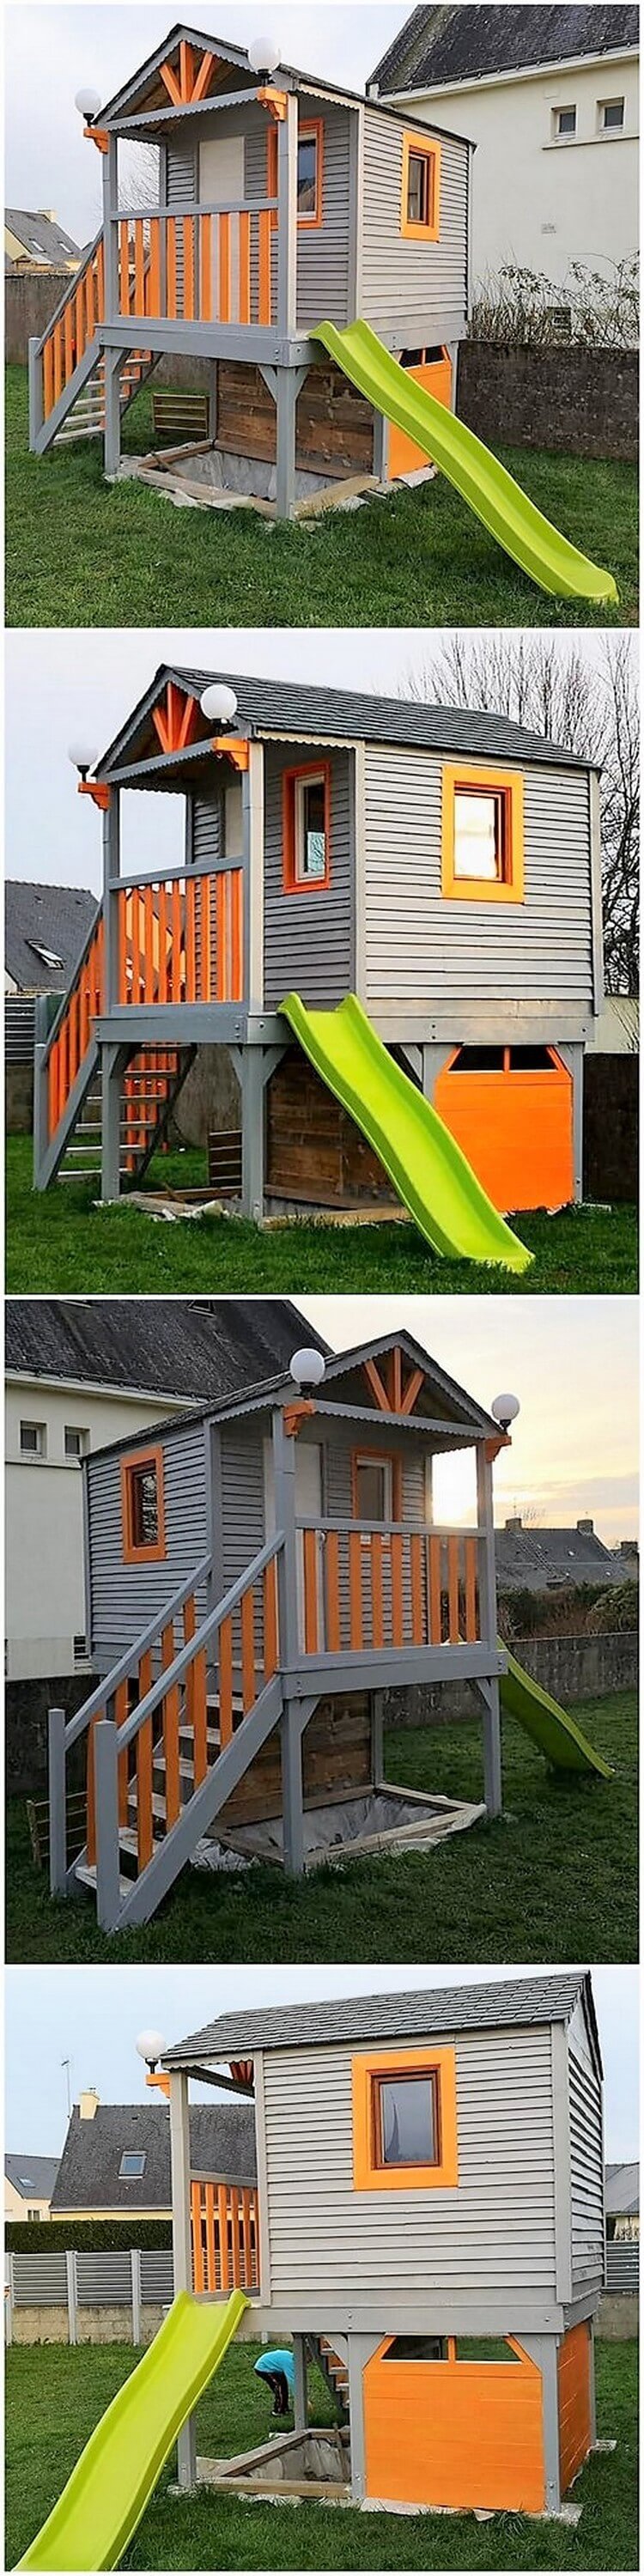 Pallet Playhouse with Slide